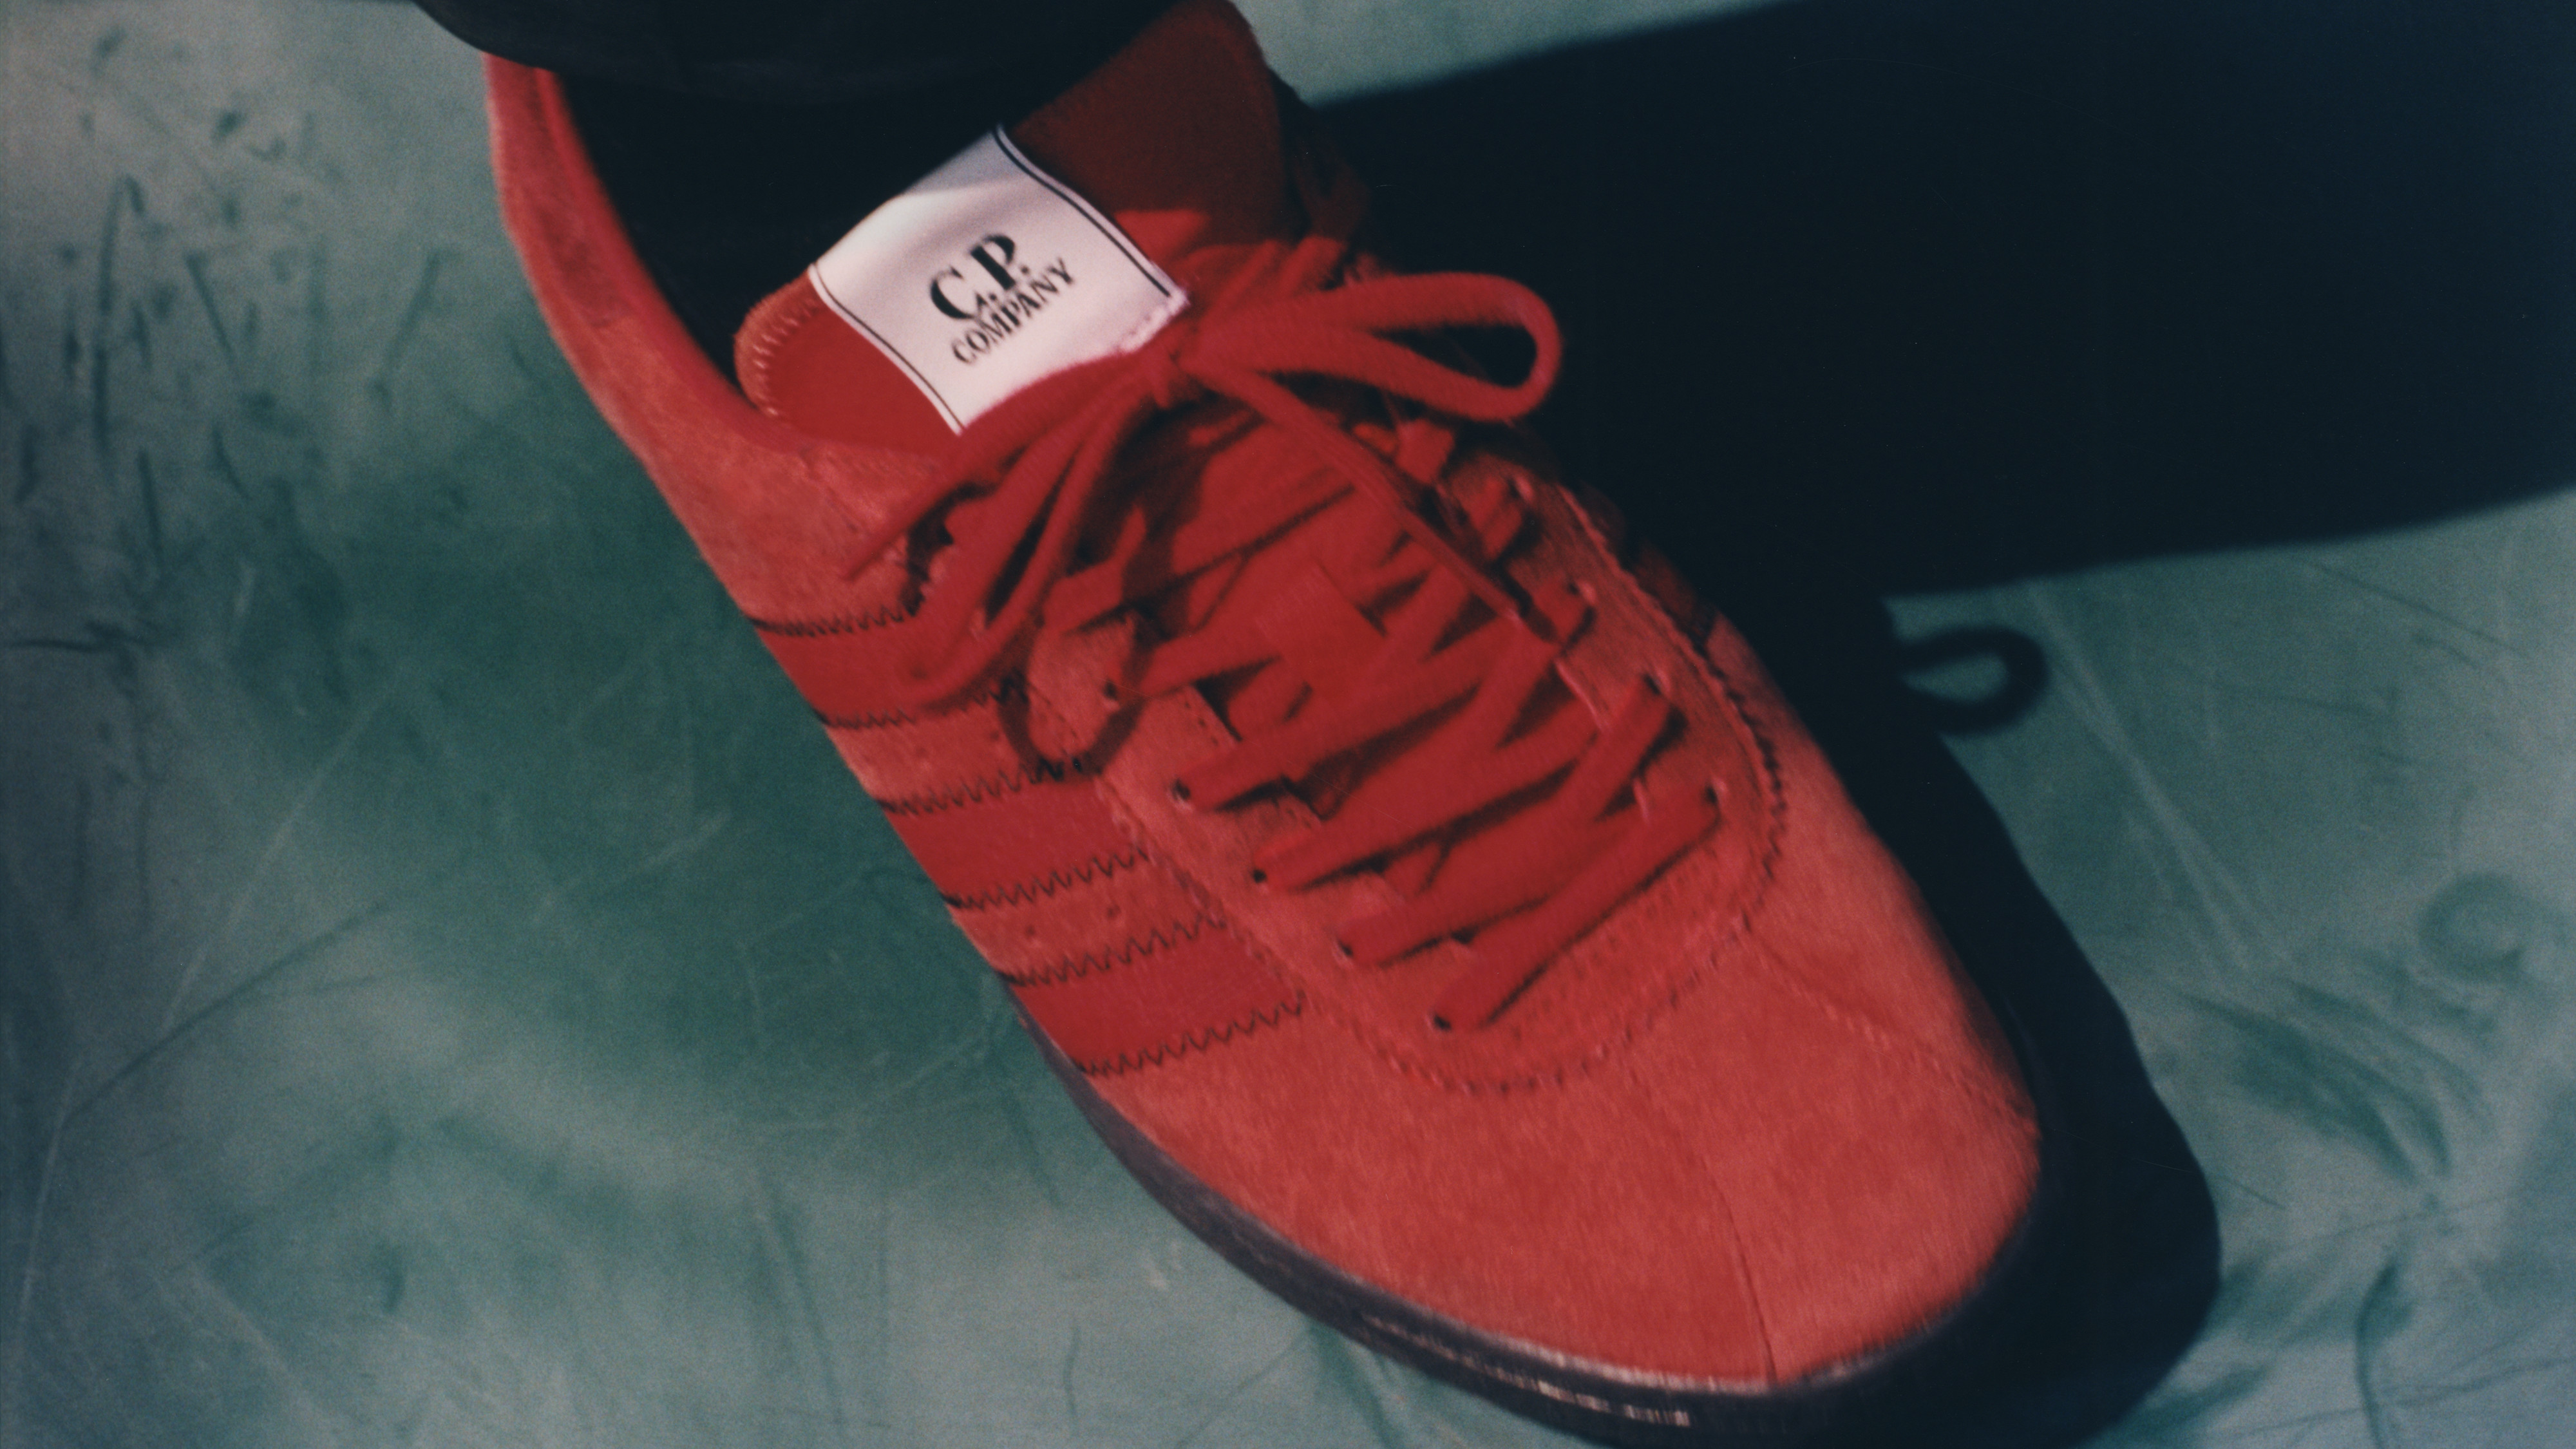 Adidas Originals x C.P. Company Collection Date | Sole Collector